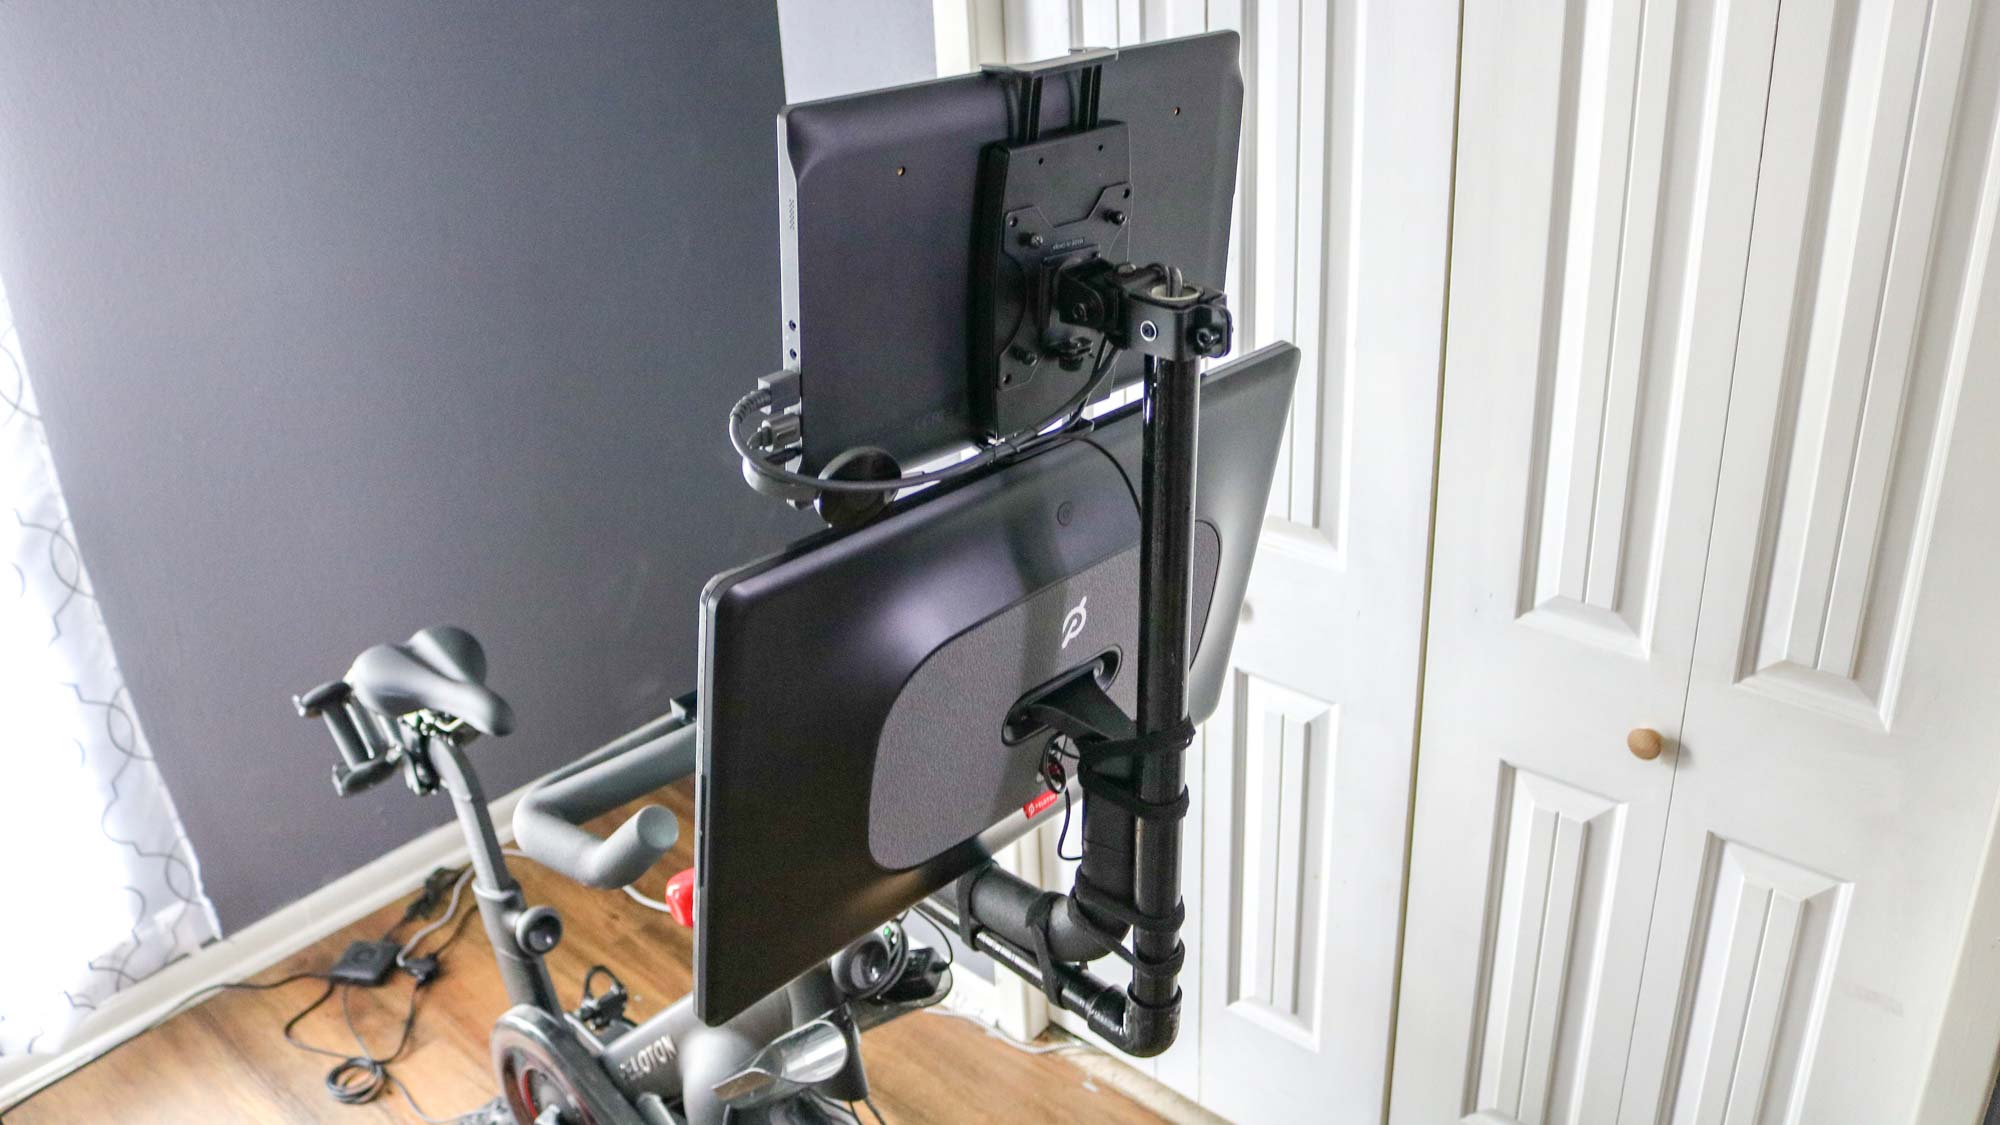 A rear shot of my DIY monitor arm for the Peloton Bike Plus